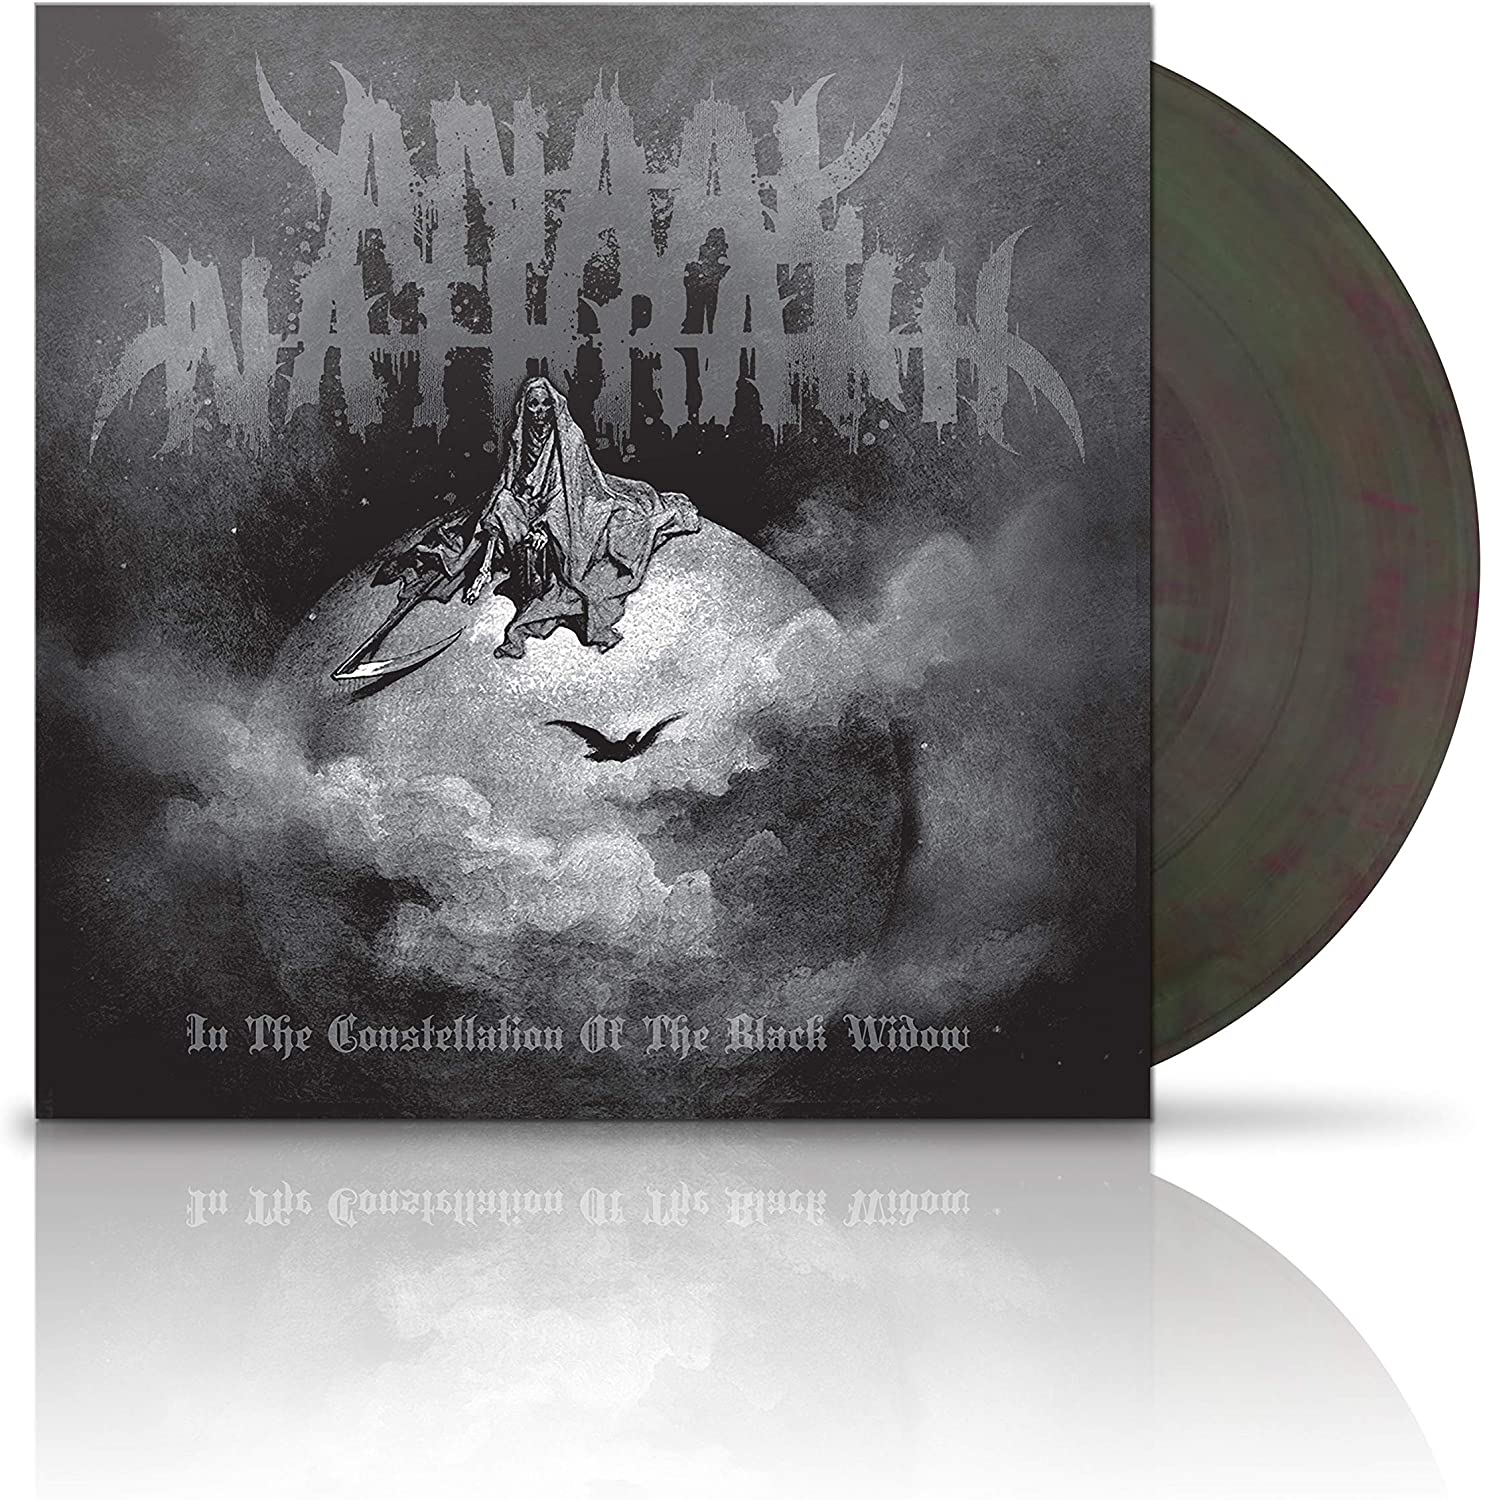 Anaal Nathrakh "In The Constellation Of The Black Widow" Green / Grey Marbled Vinyl